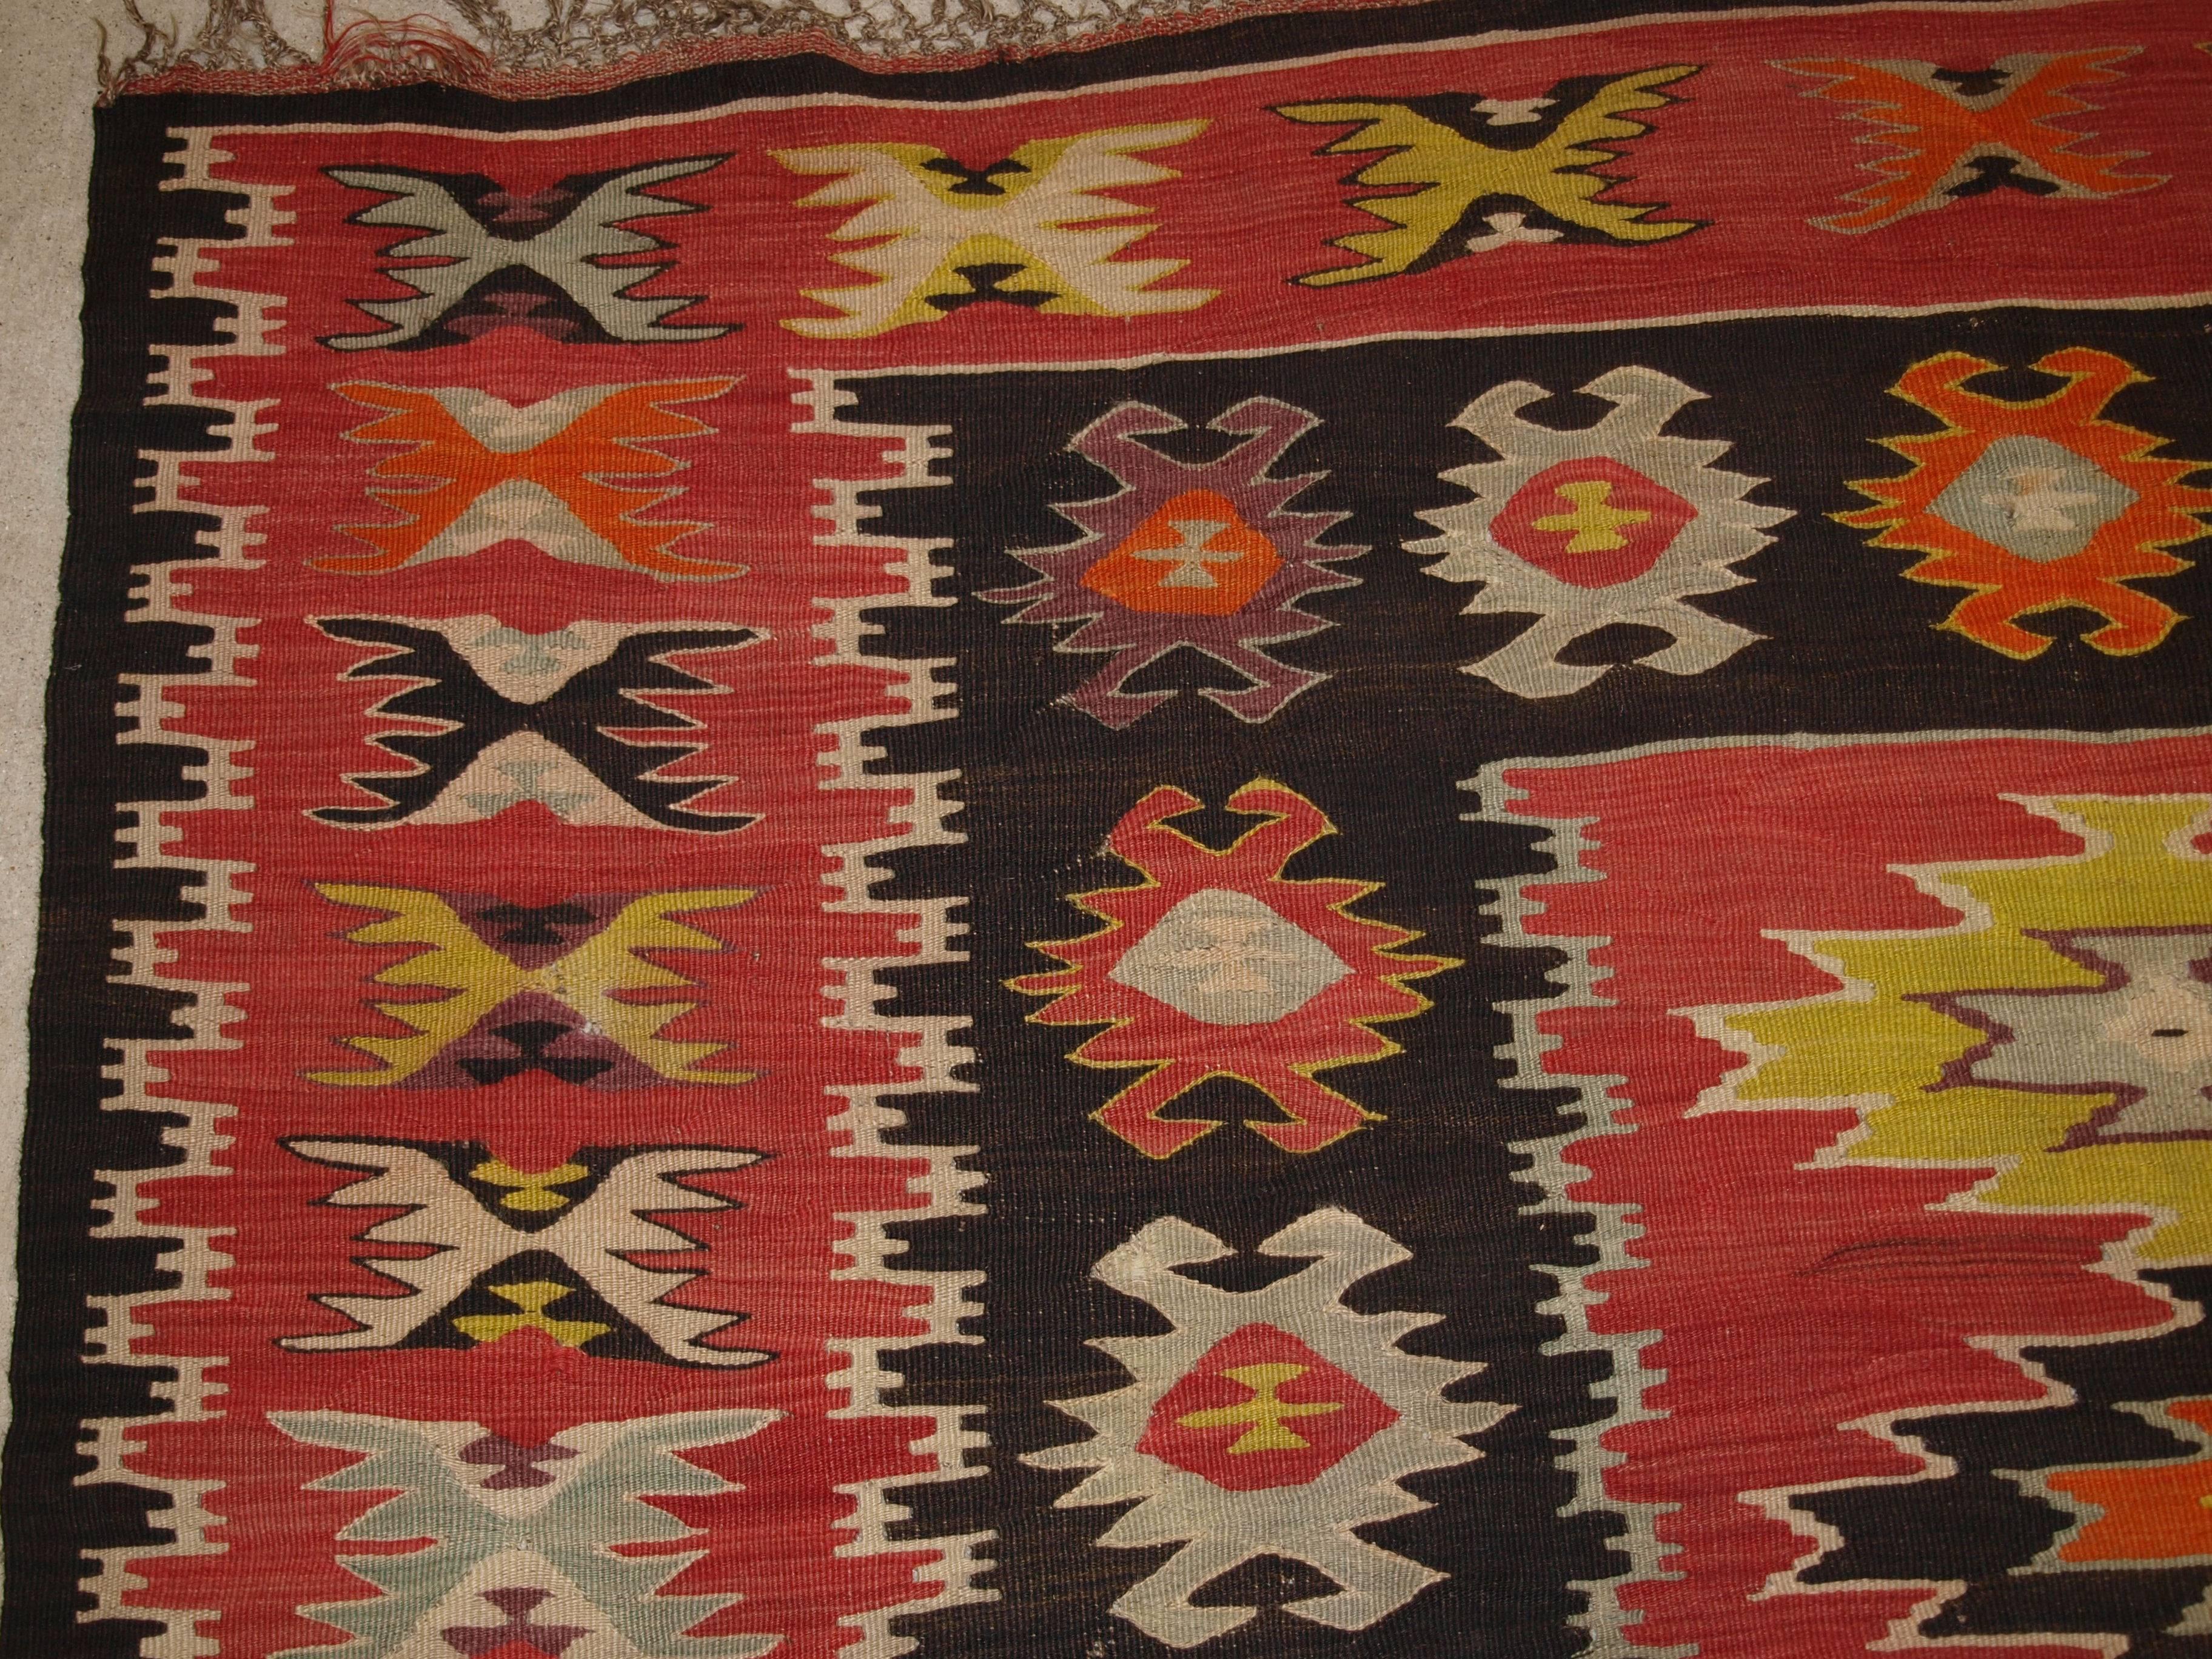 Old Turkish Sarkoy Kilim rug, soft red ground, striking design, circa 1920.
Size: 9ft 0in x 7ft 9in (275 x 235cm).

Old Anatolian Sharkoy Kilim, Western Turkey

circa 1920

Sharkoy Kilims are also known as Sarkoy or Thracian, they originate